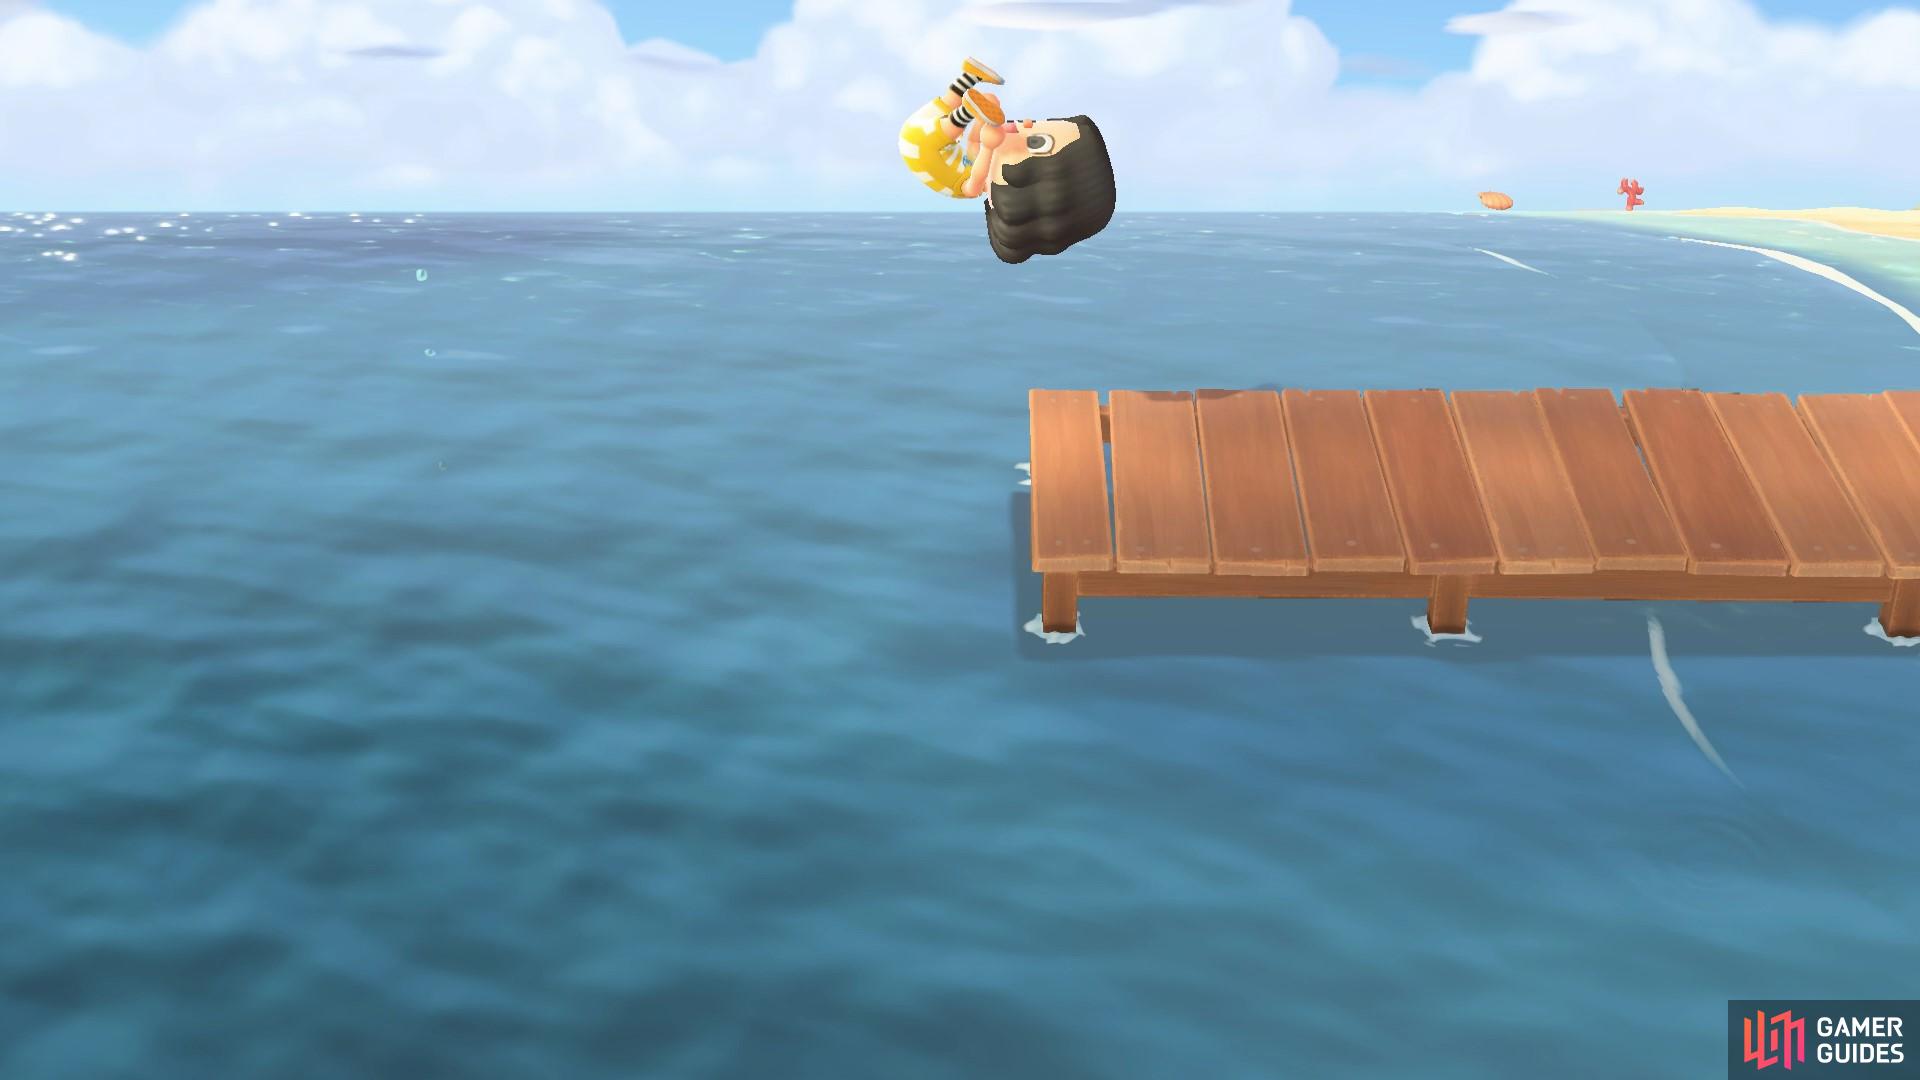 Did you know that if you run and jump off a pier you'll do a flip?